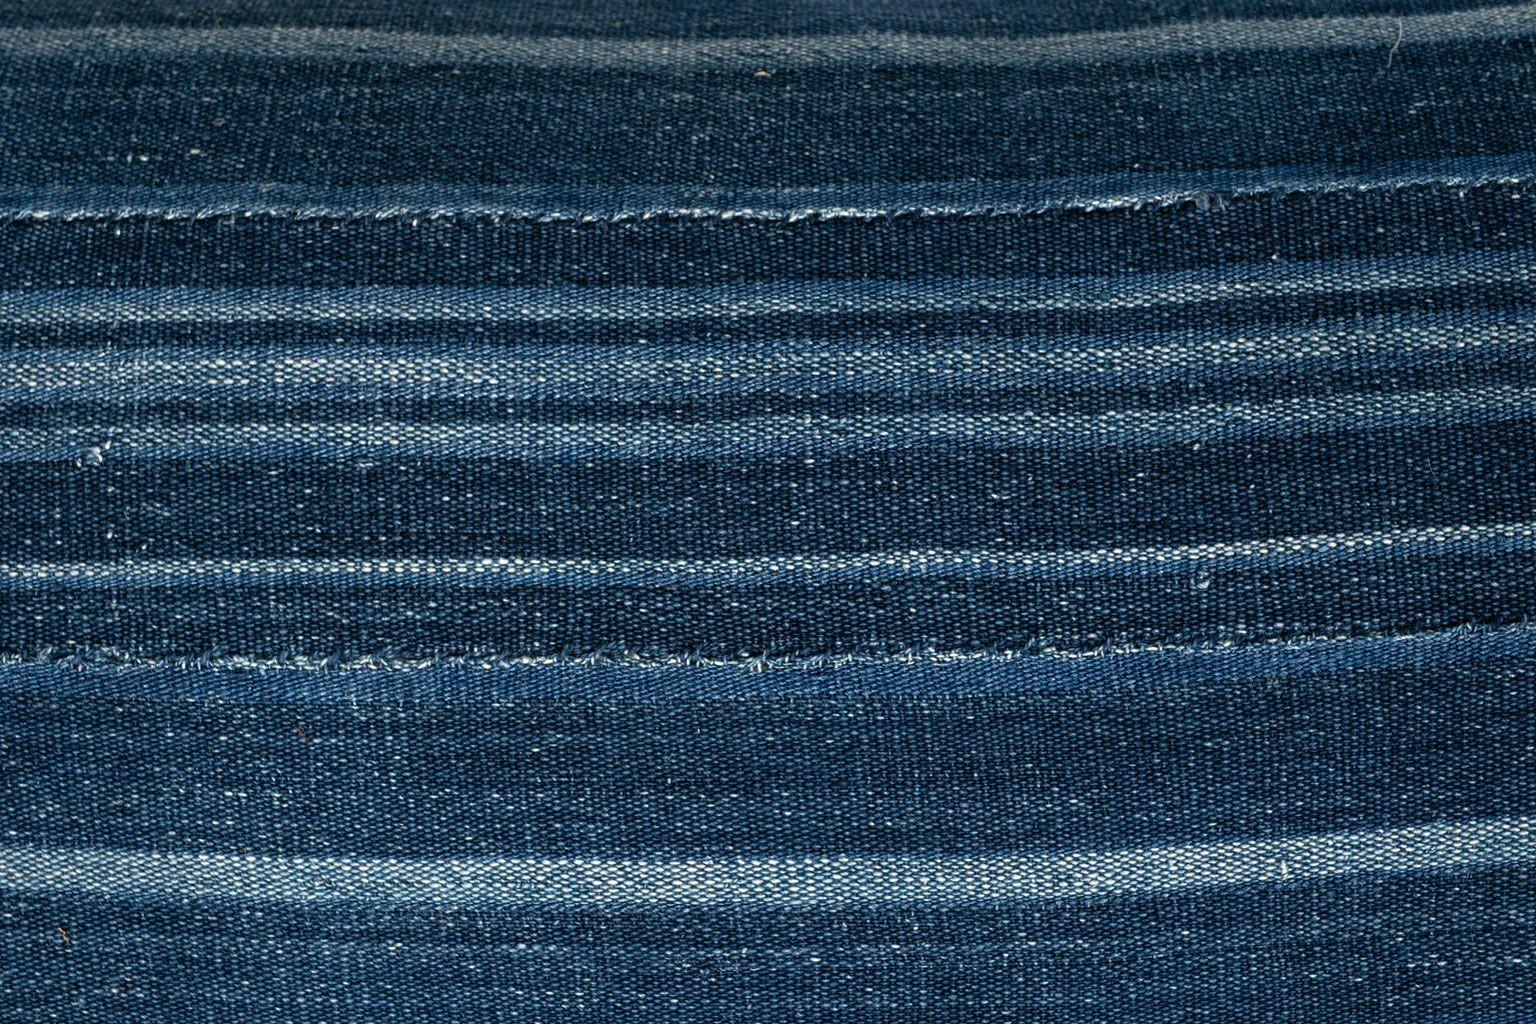 Large size faded indigo tone-on-tone stripe lumbar cushion made from vintage handwoven and hand-dyed slubby cotton fabric. Versatile tone-on-tone indigo stripe runs vertically on one face and is self-backed with same fabric running horizontally.